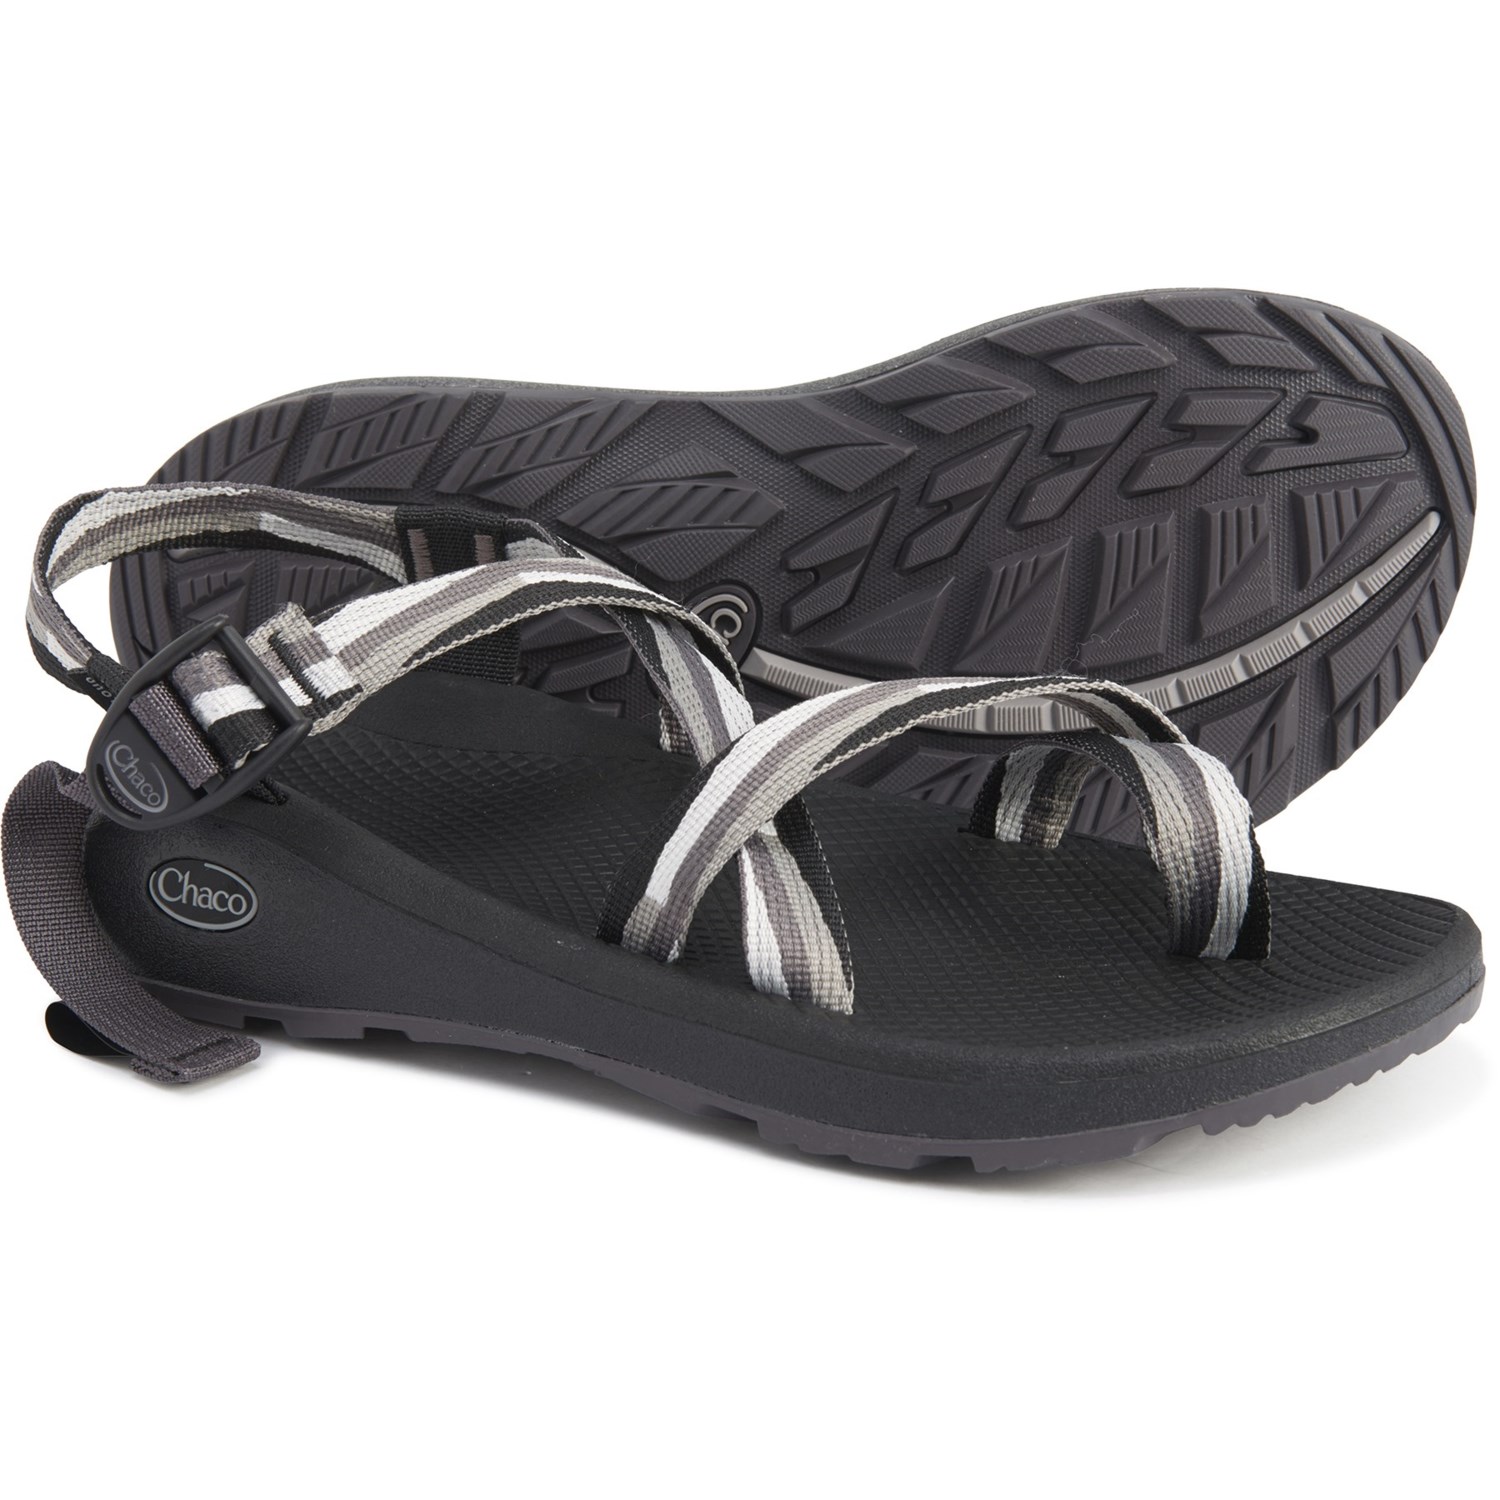 grey and white chacos